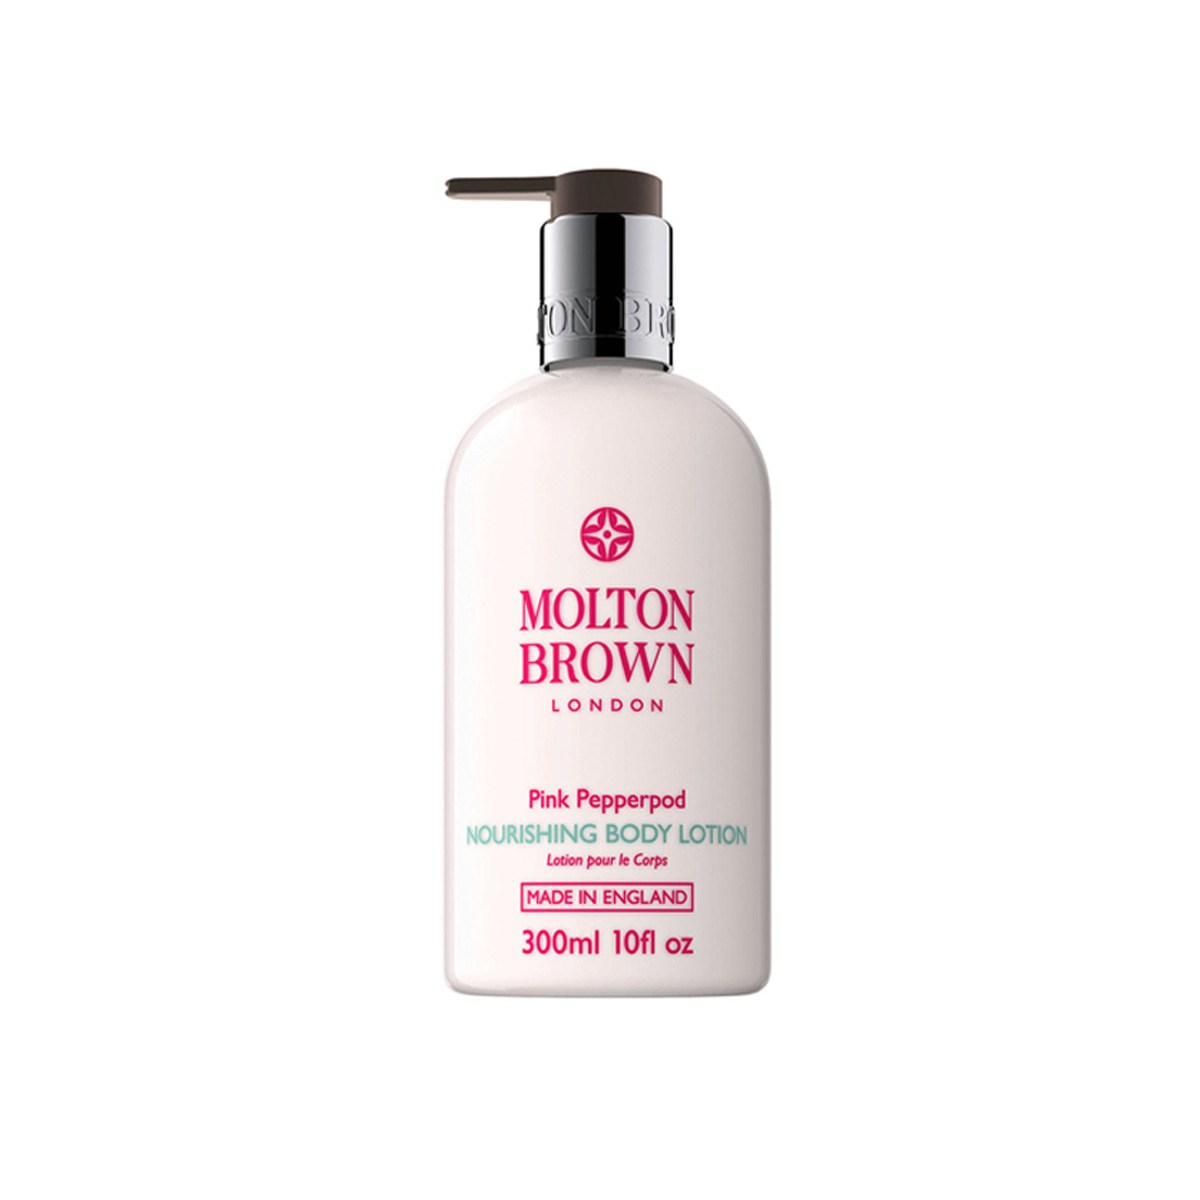 Molton Brown Pink Pepperpod Pink Pepperpod Body Lotion 300ml